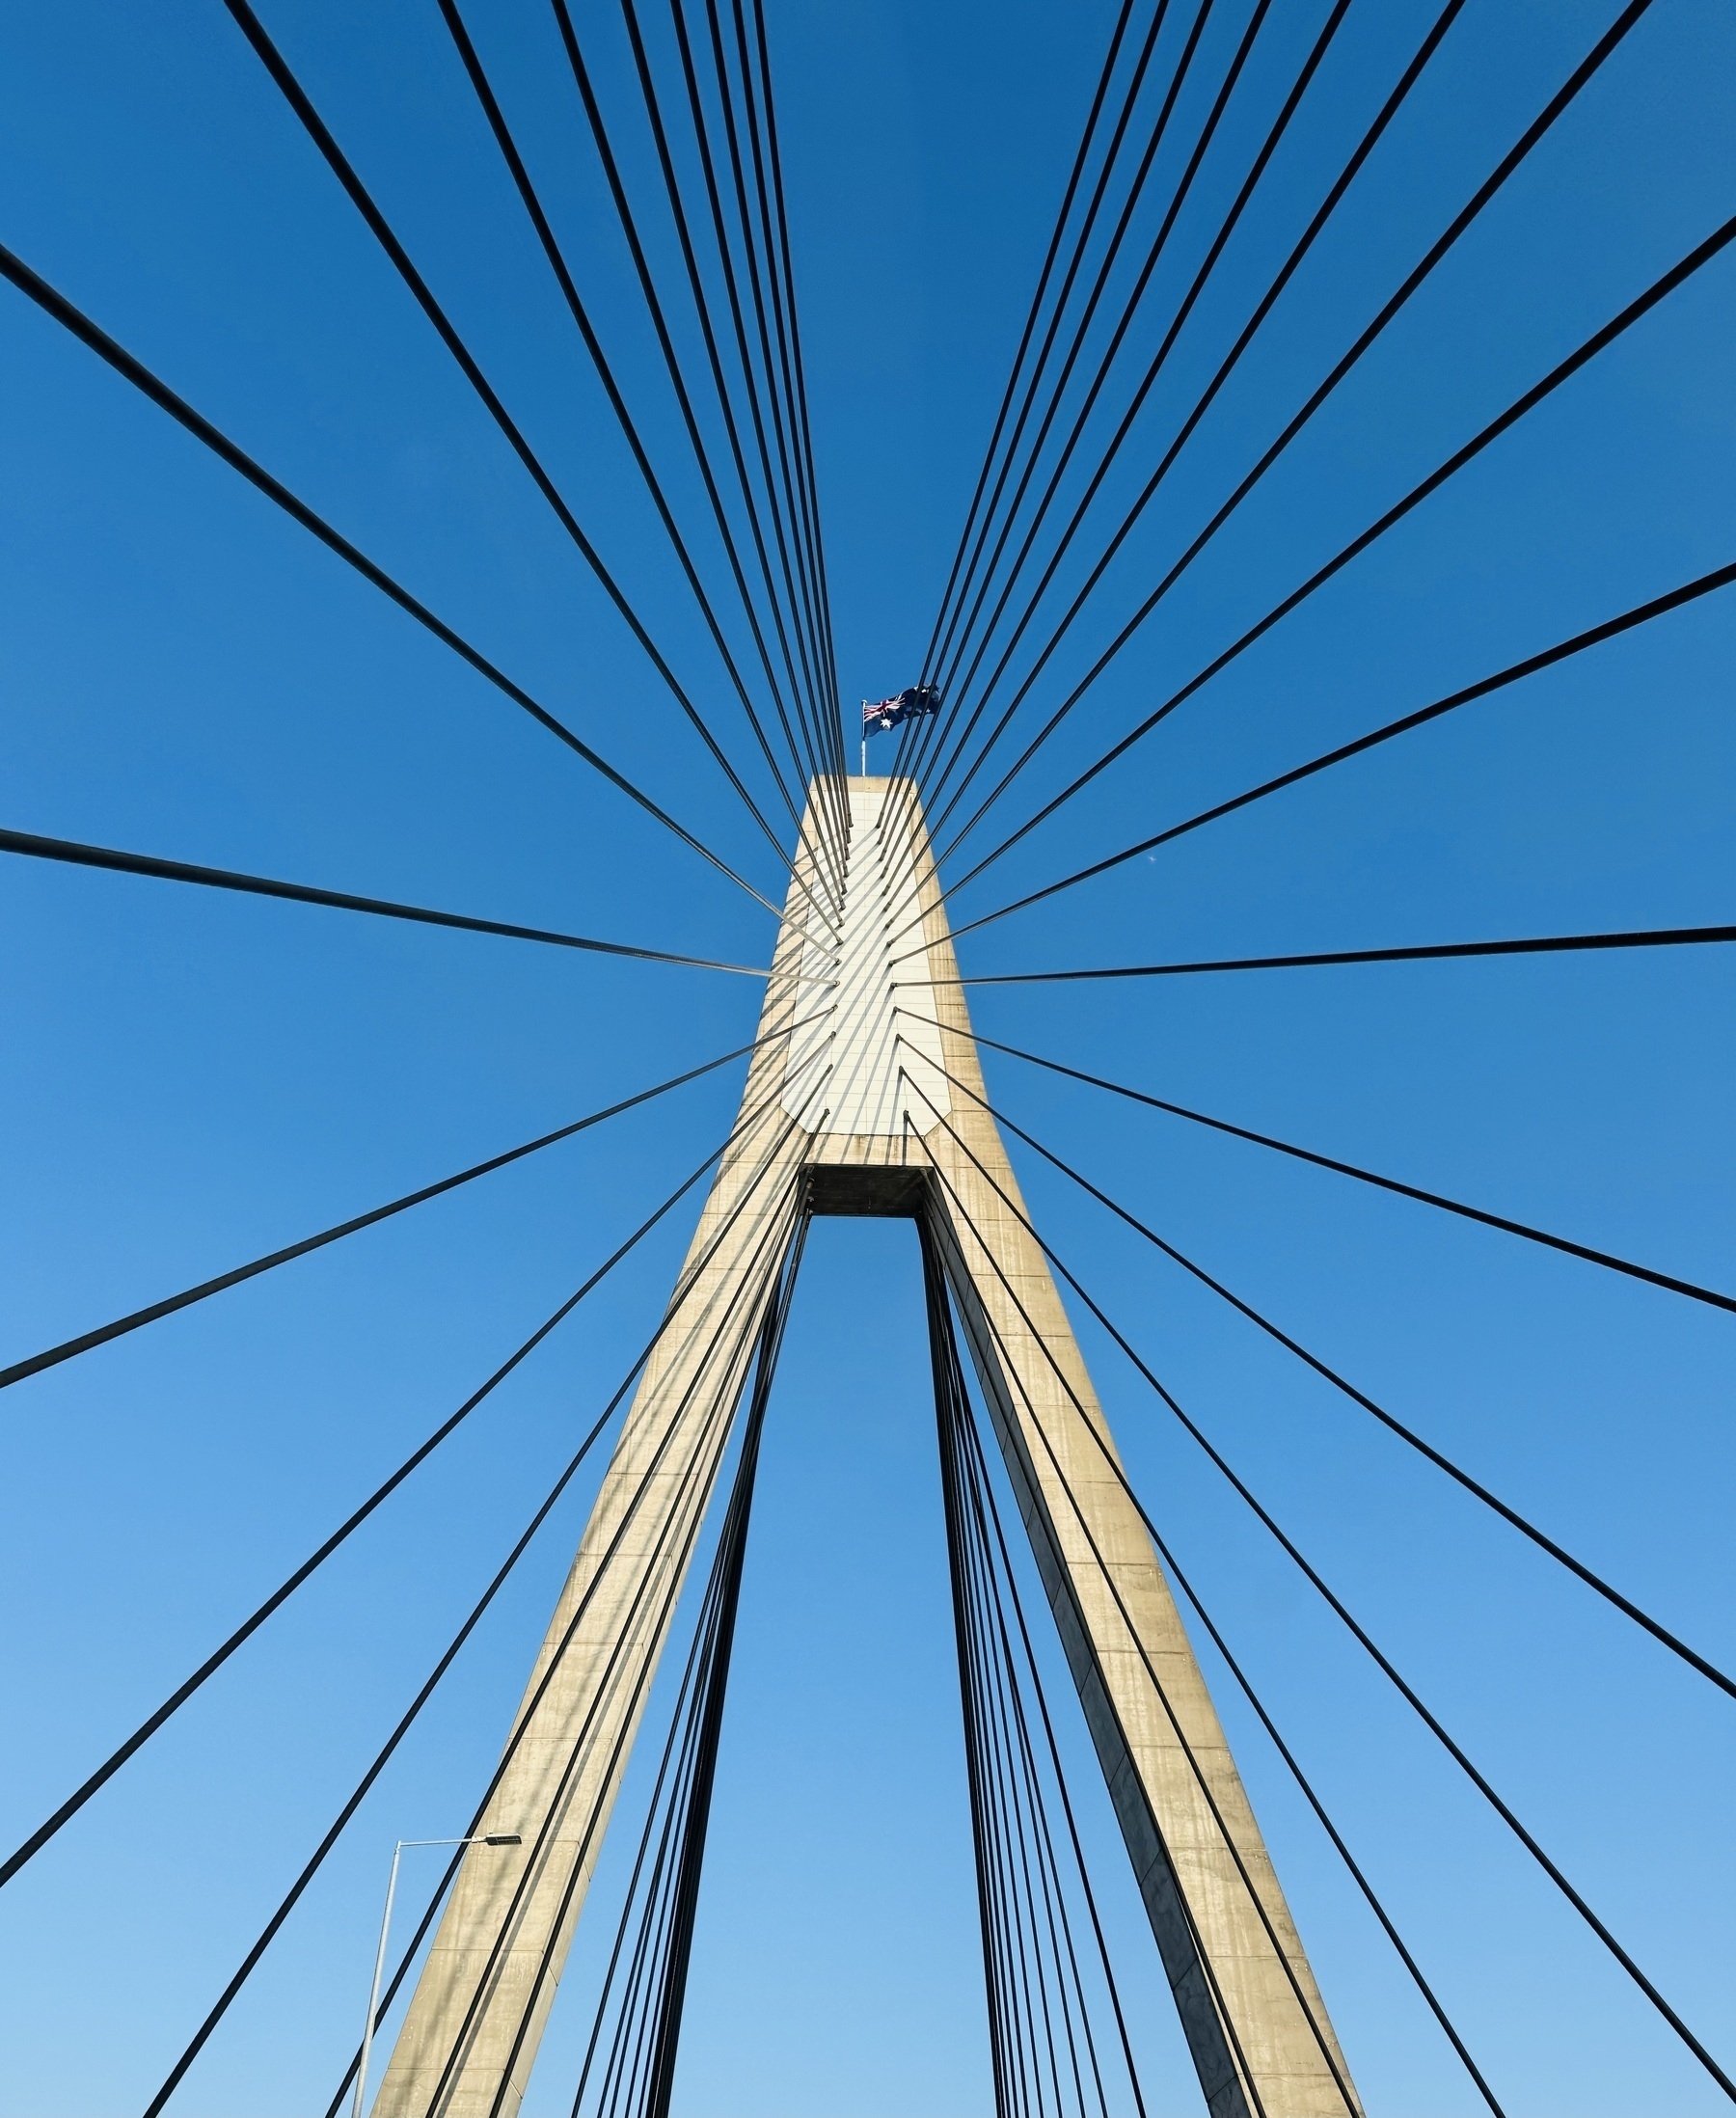 Cables radiating out from one of the towers of the ANZAC bridge in Sydney.